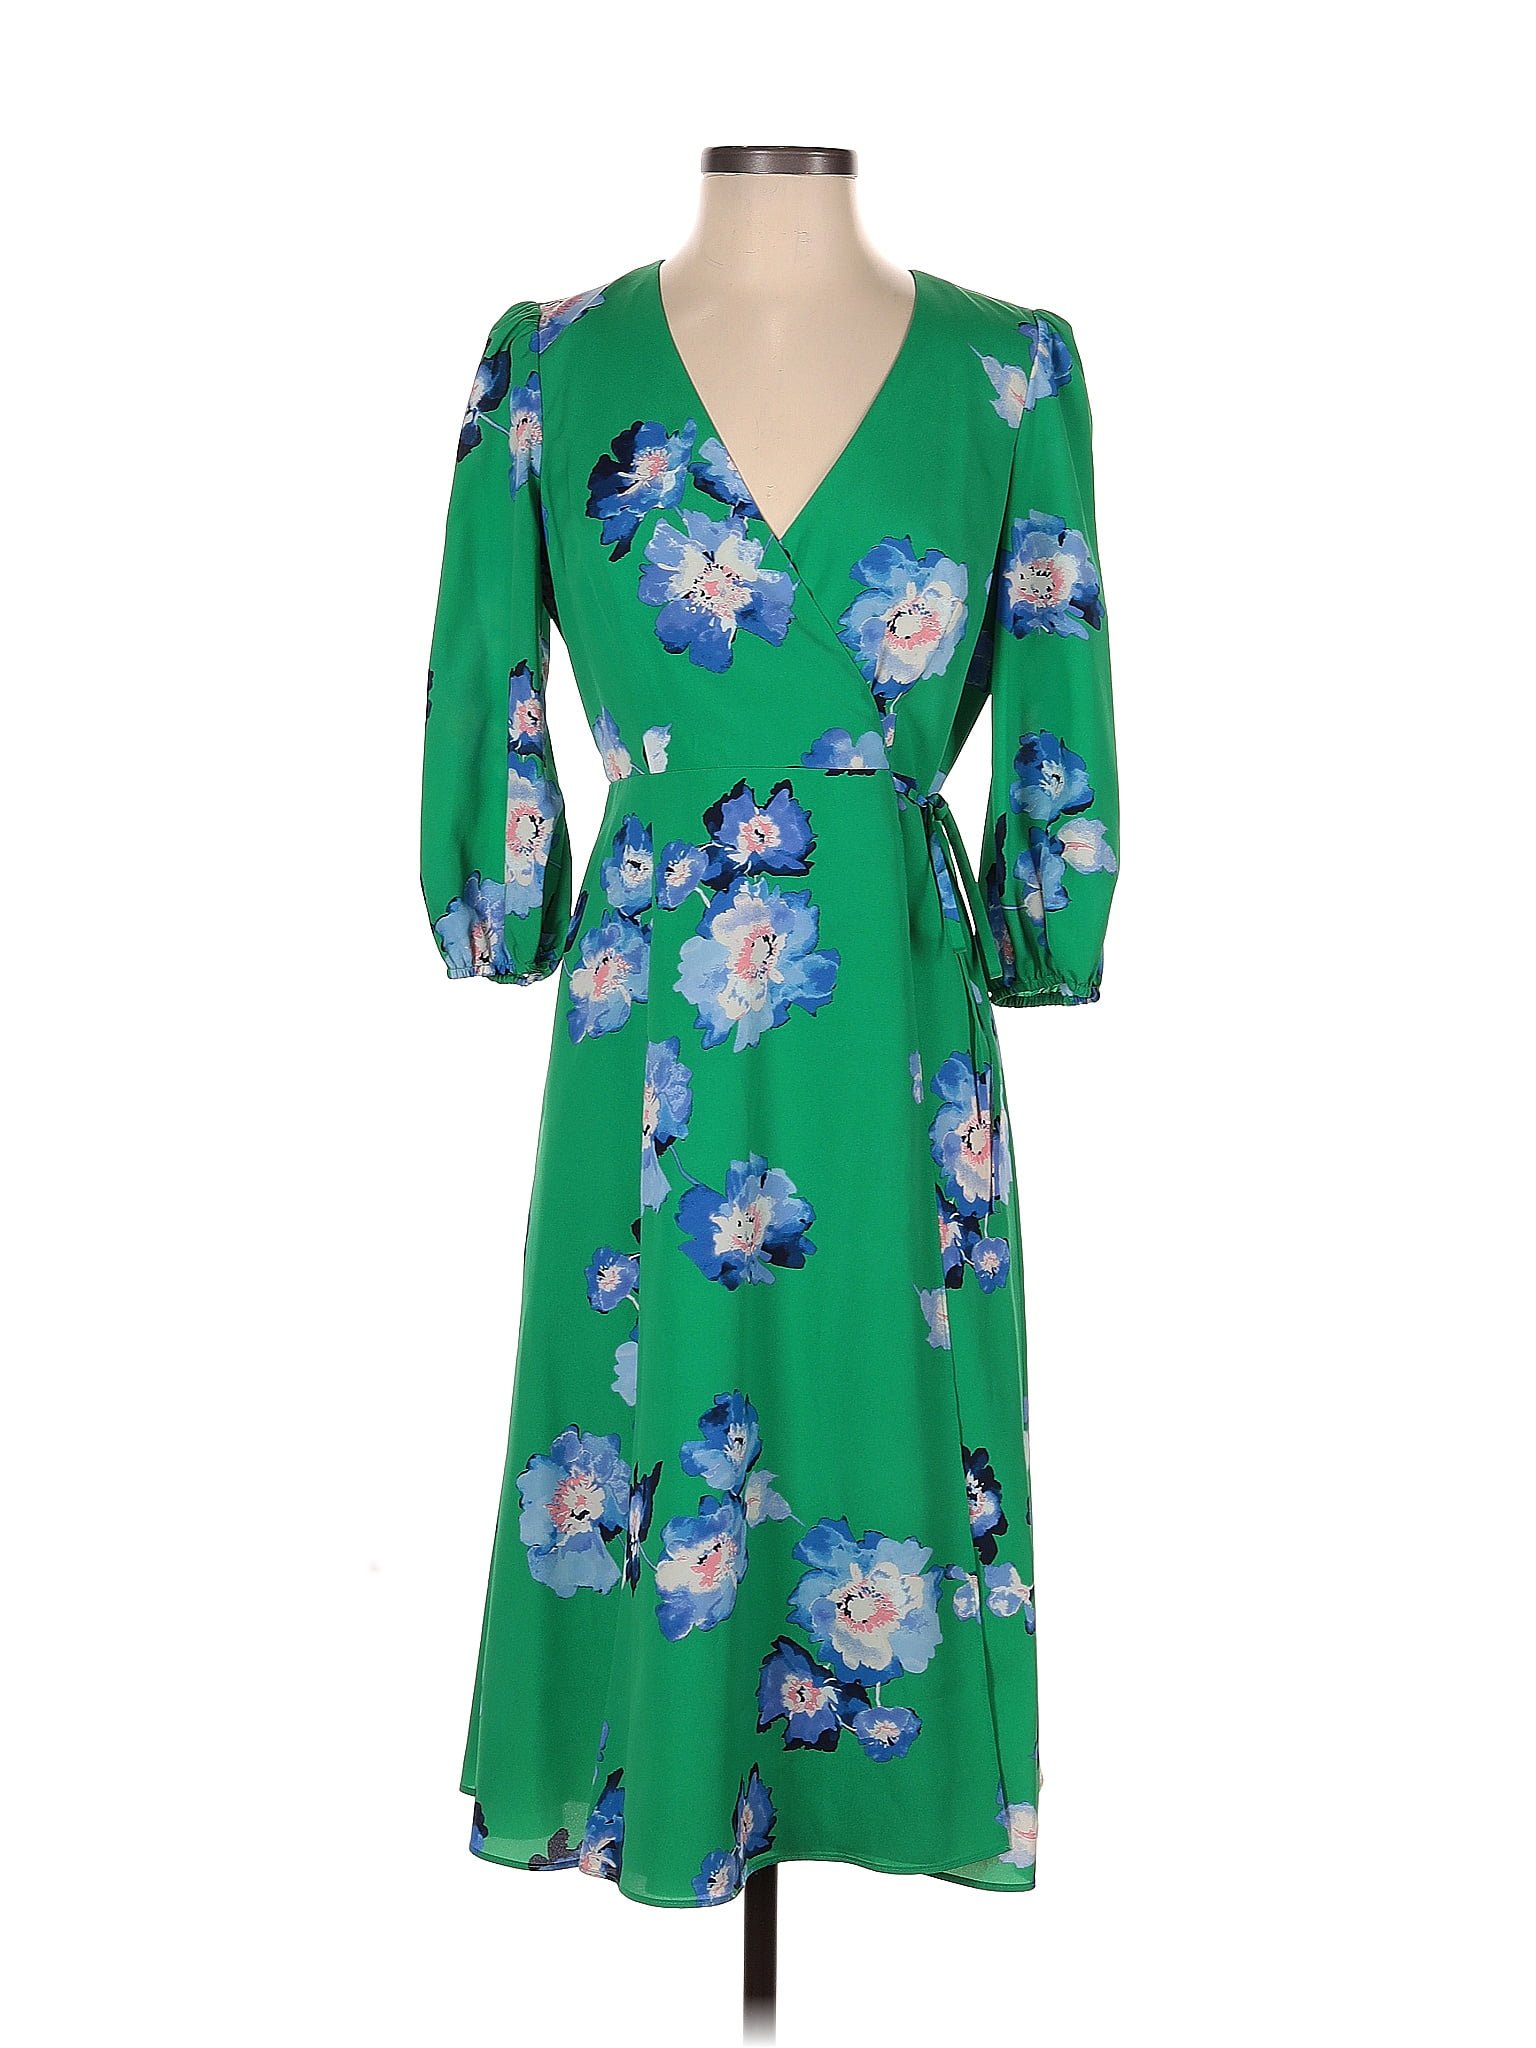 Eliza J 100% Polyester Floral Green Casual Dress Size 4 (Petite) - 73% ...